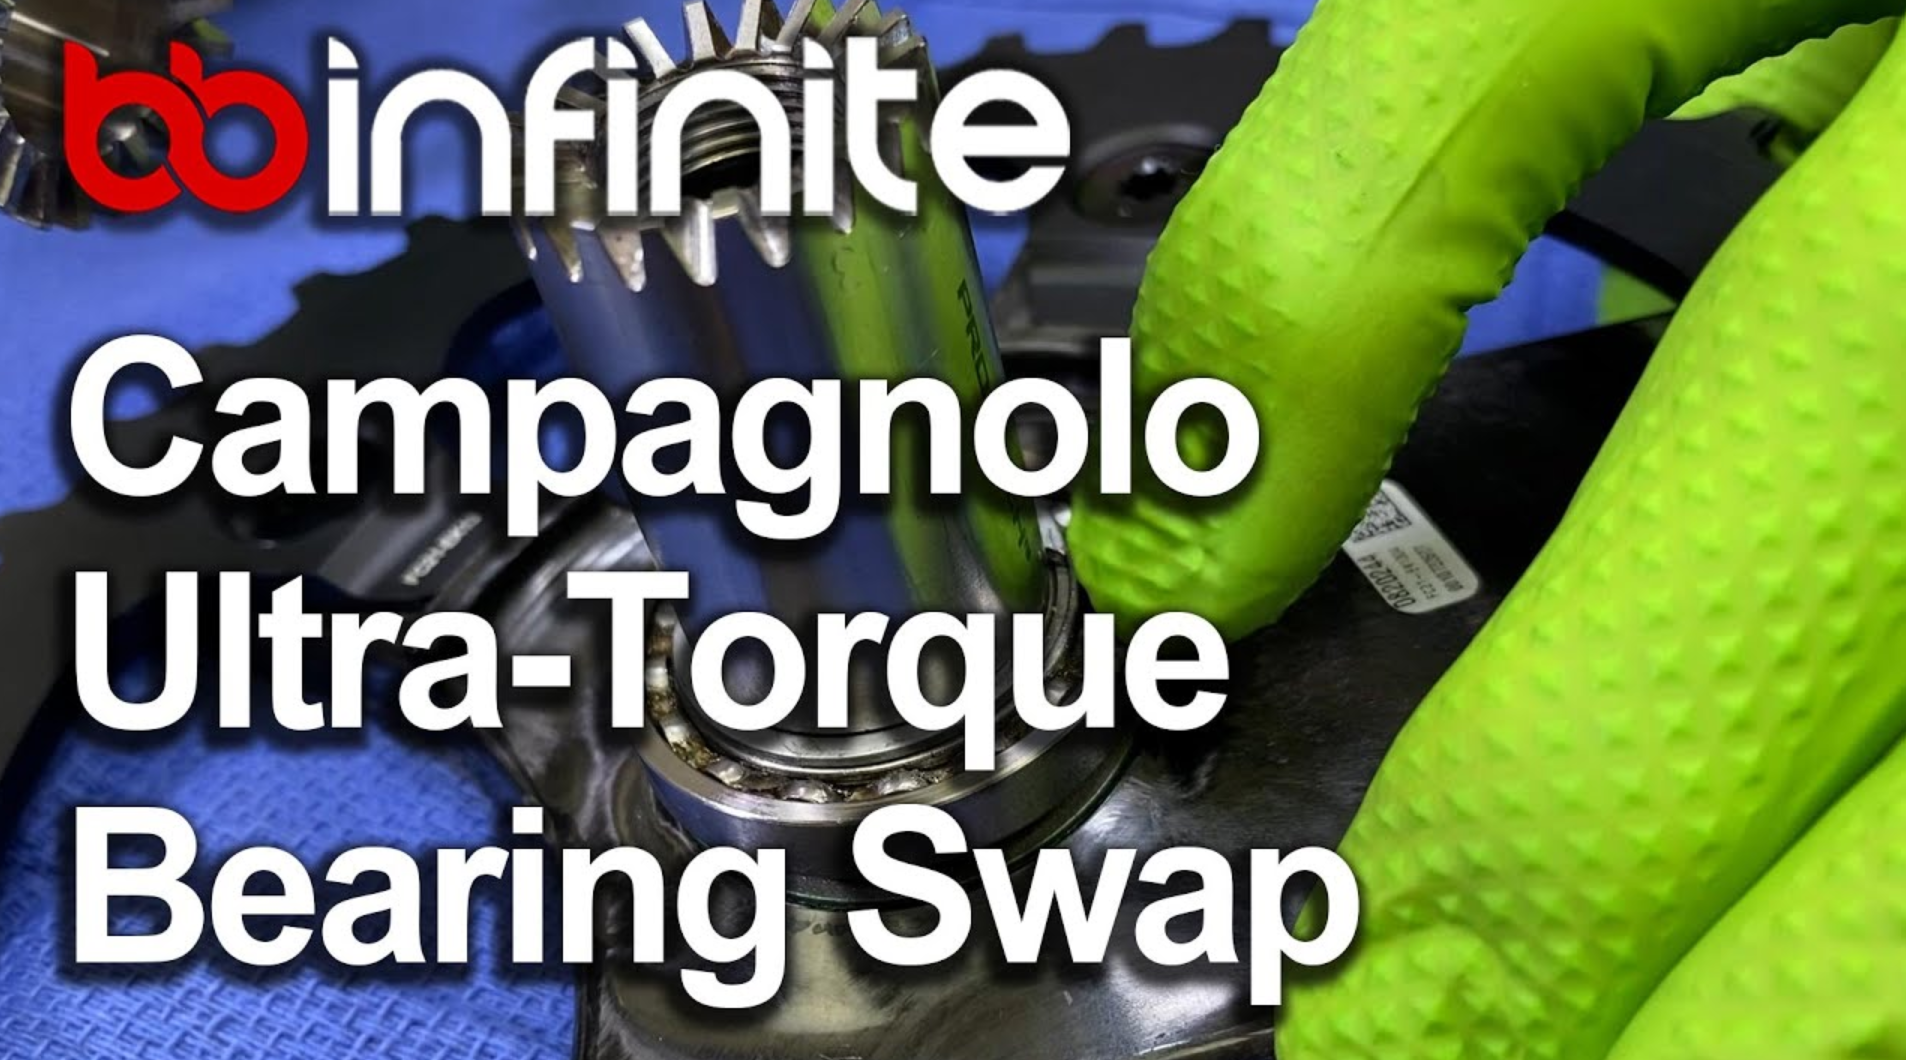 HOW TO: Campagnolo Ultra-Torque Bearing Swap